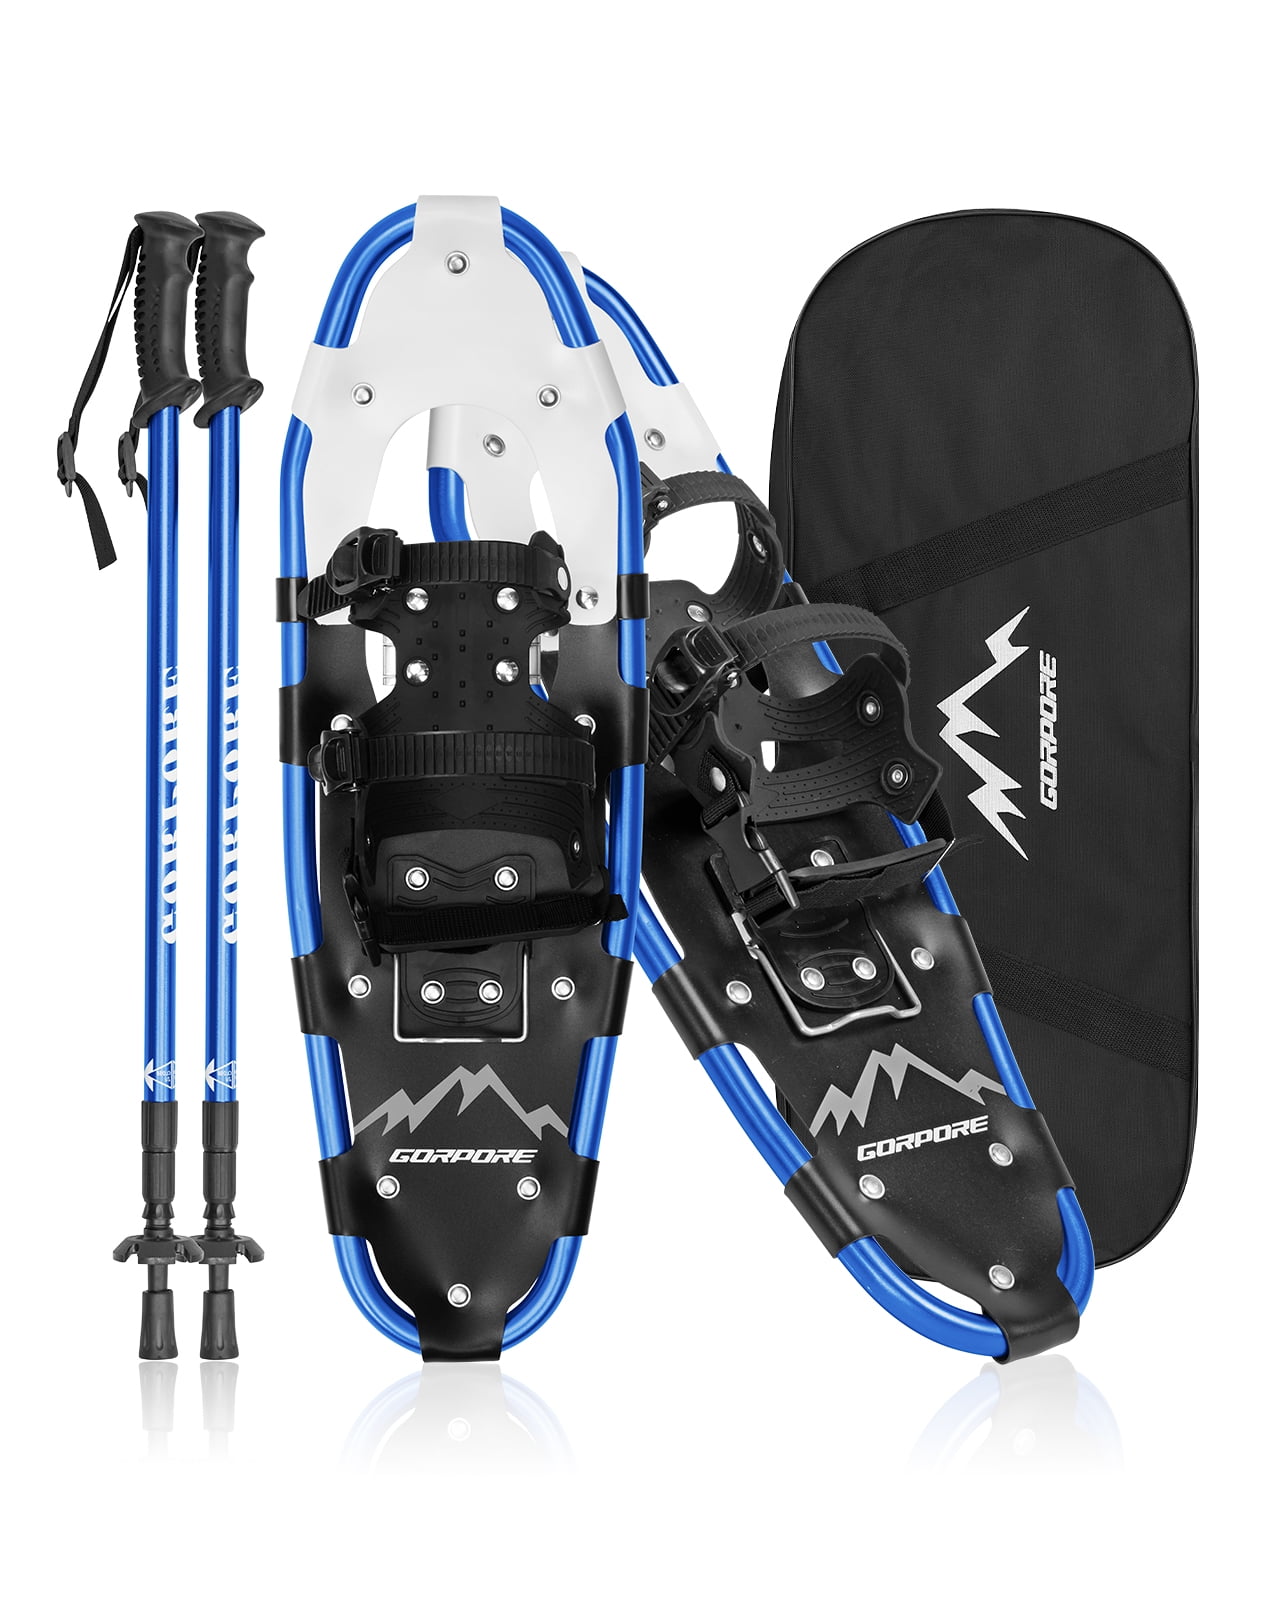 Aluminum Terrain Lightweight Snowshoes with Trekking Poles and Carrying Tote Bag INHE Heel Lift Design 21/25/27/30 Inches Snow Shoes for Women Men Girls Boys Kids 